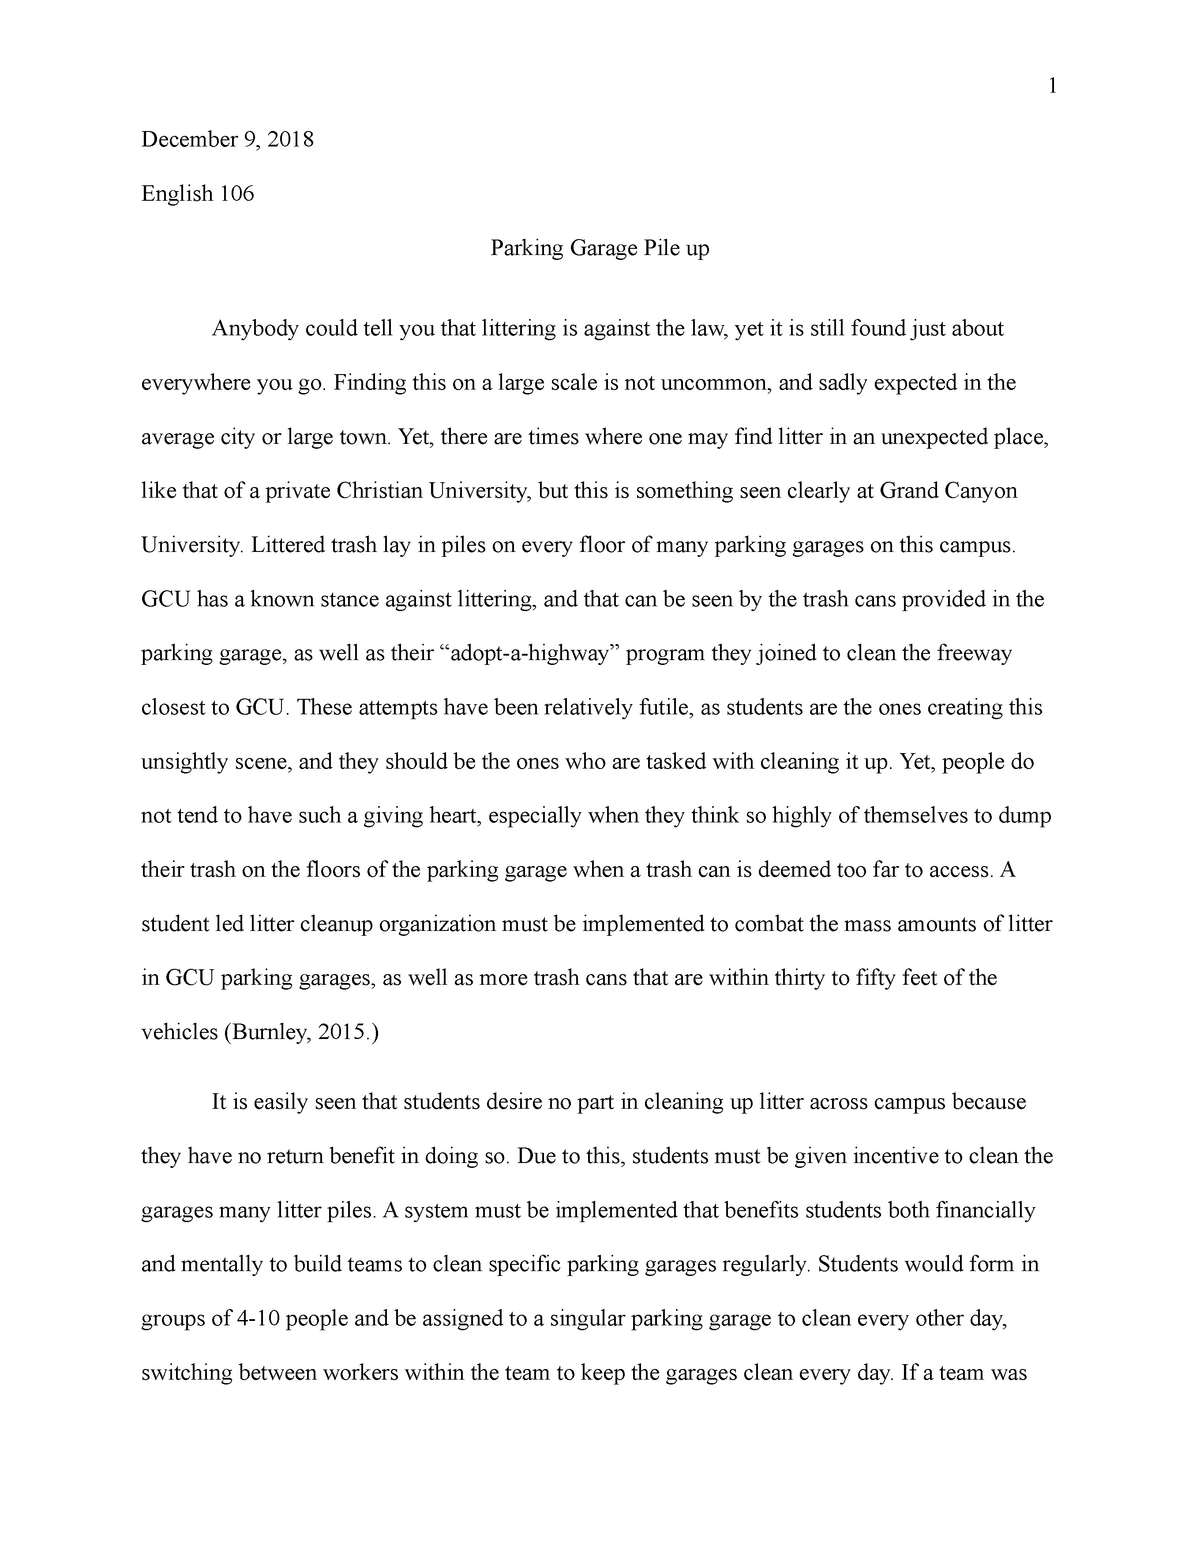 how to start a proposal argument essay